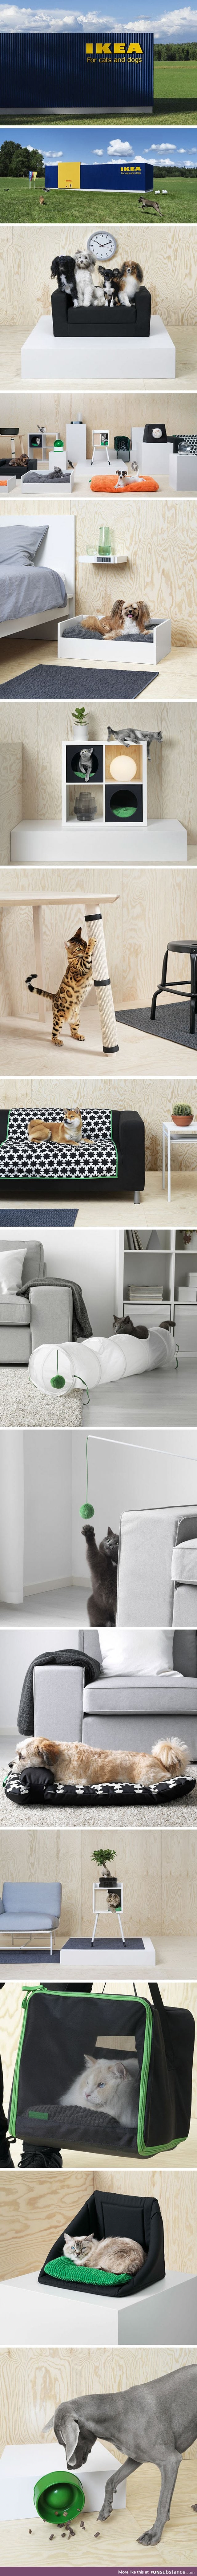 Ikea pet furniture collection just 'purrfect' for animal lovers